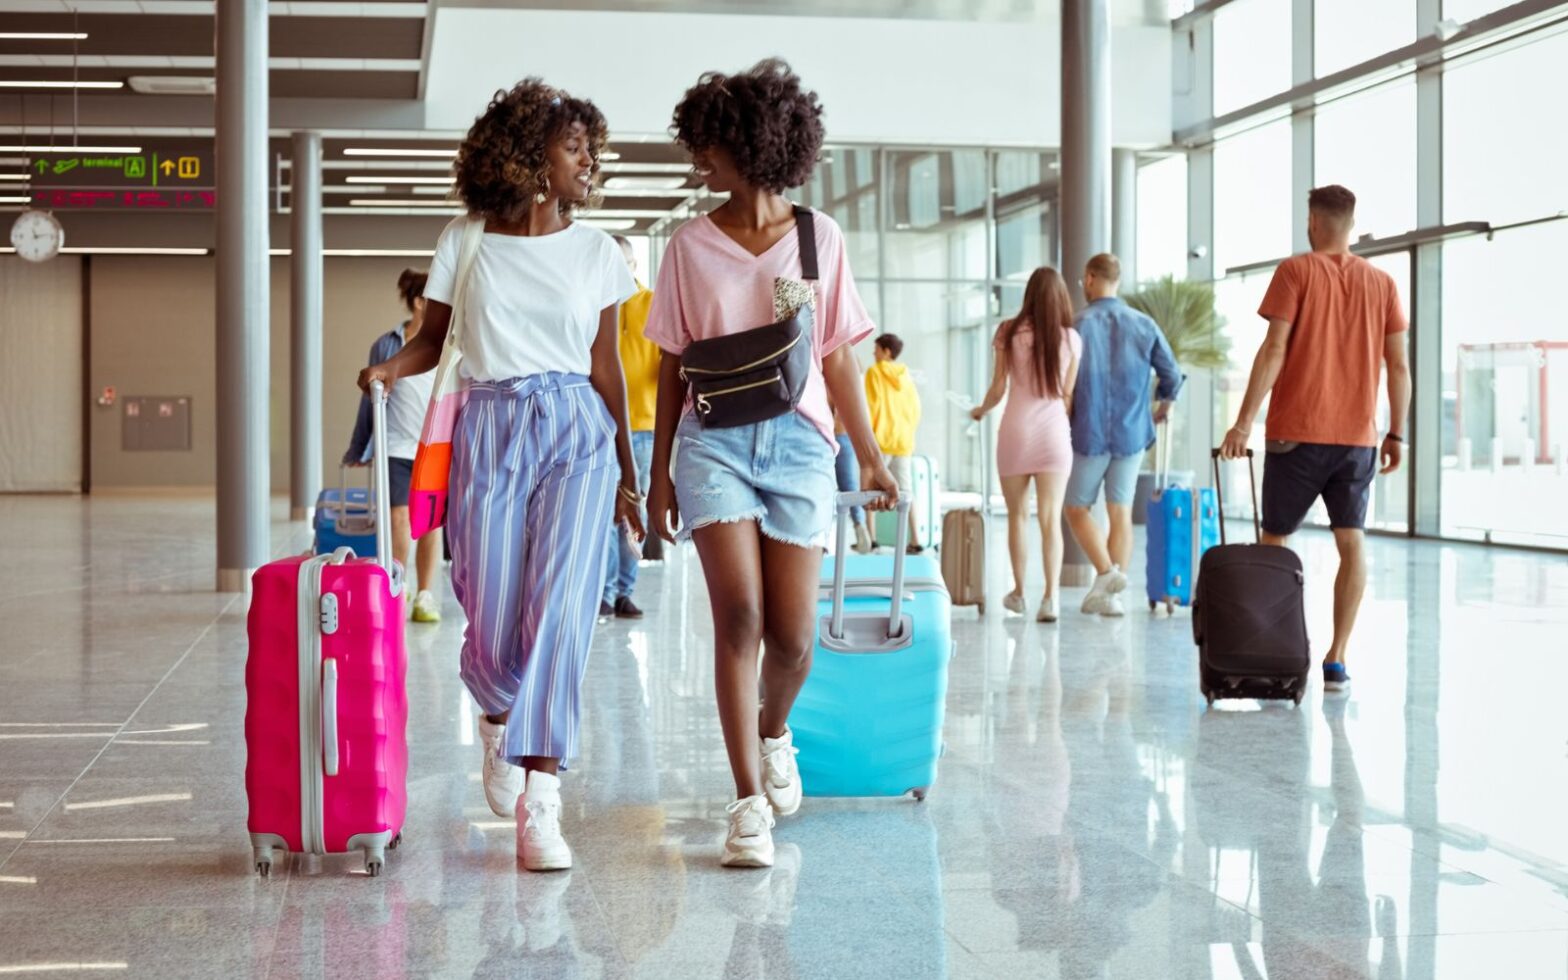 two young Black women walking through the airport with luggage - Gen Z travelers